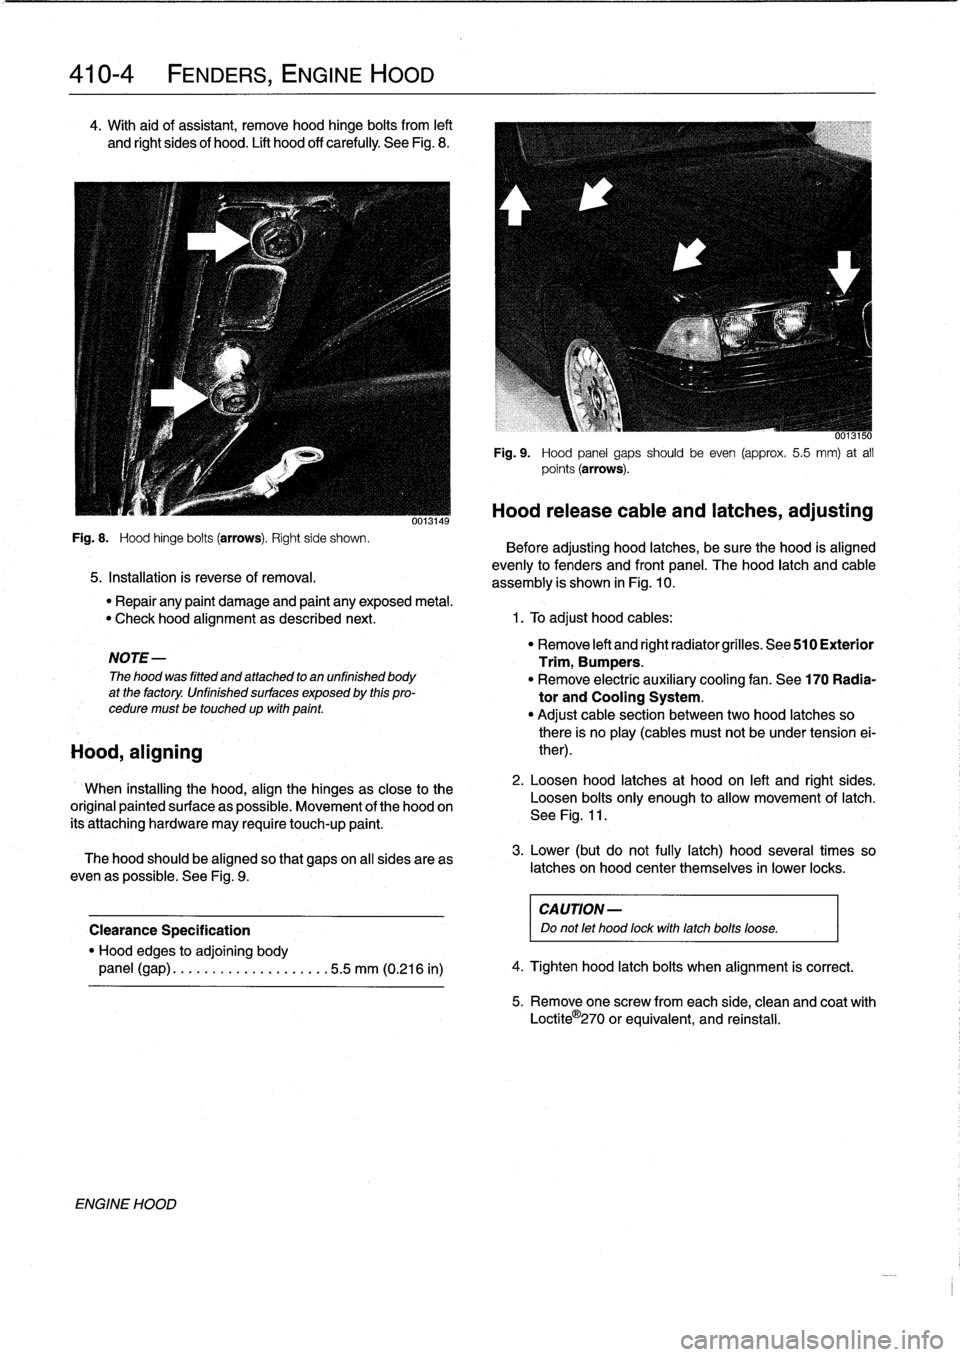 BMW 318i 1995 E36 Workshop Manual 
410-4

	

FENDERS,
ENGINE
HOOD

4
.
With
aid
of
assistant,
remove
hood
hinge
bolts
from
left

and
Rght
sides
of
hood
.
Lift
hood
off
carefully
See
Fig
.
8
.

Fig
.
8
.

	

Hood
hinge
bolts
(arrows)
.